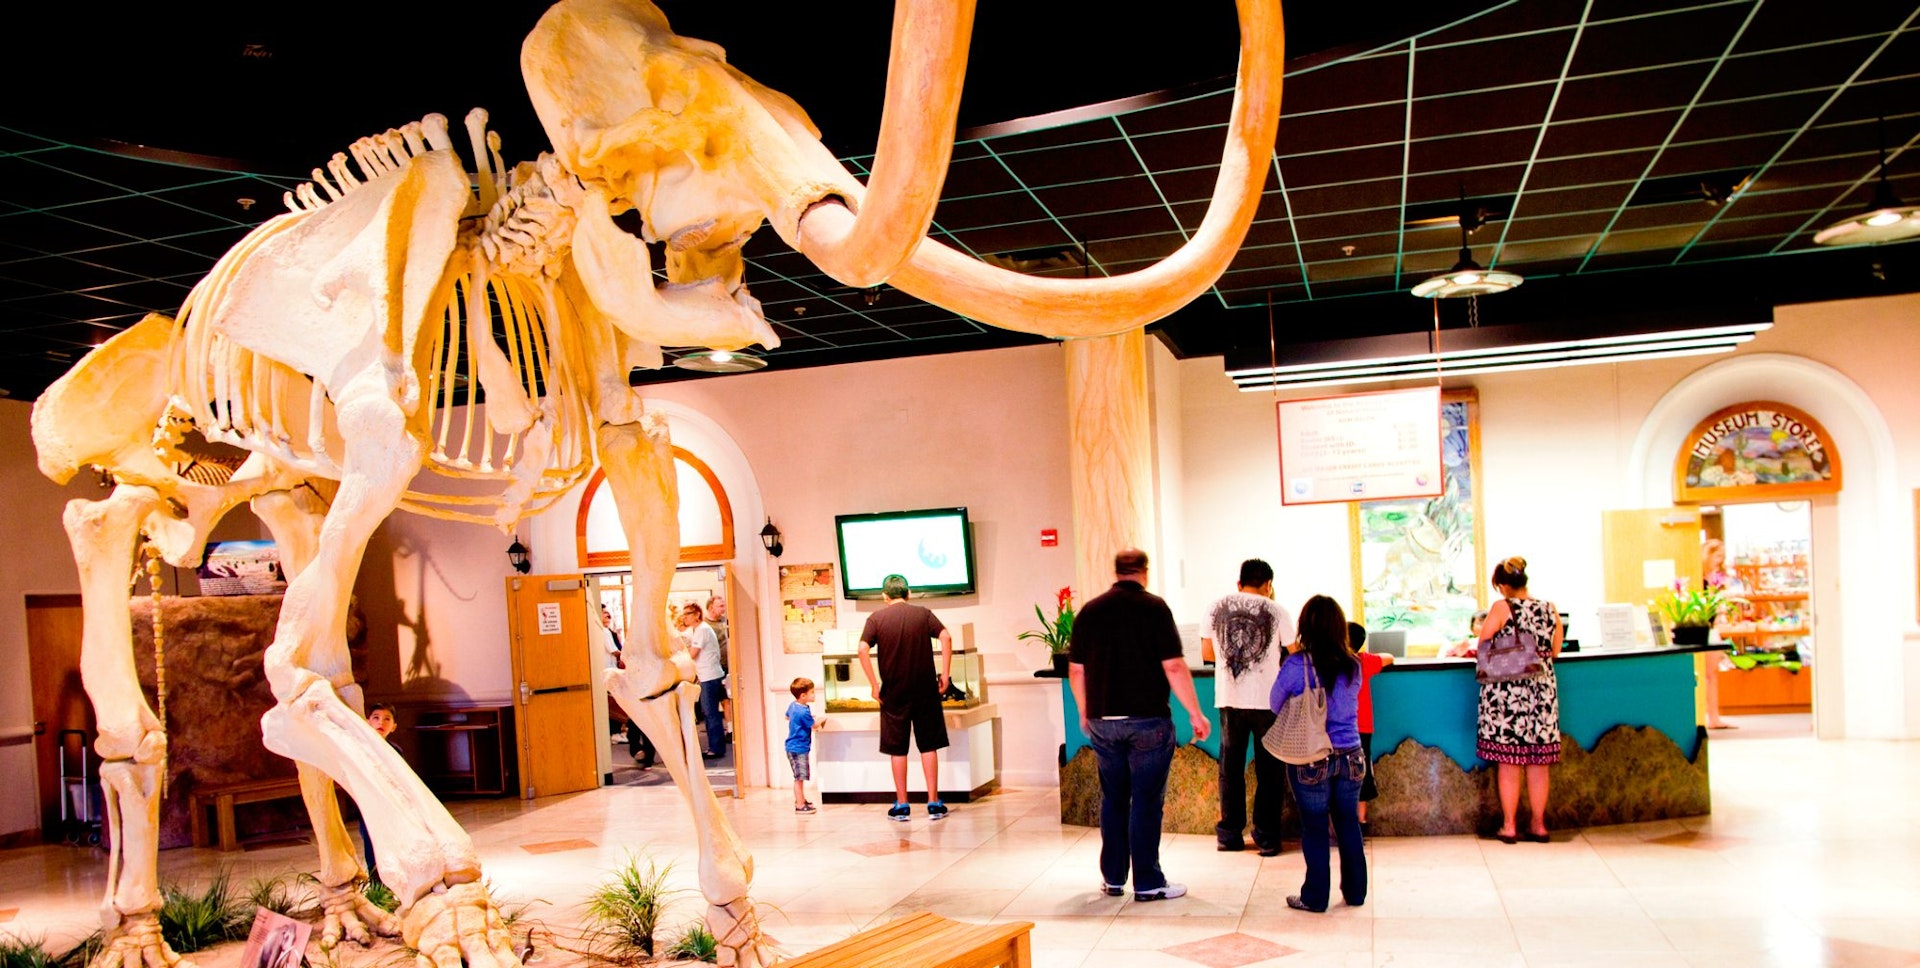 A mammoth skeleton stands on display at the Arizona Museum of Natural History, in Mesa, Arizona with visitors milling about in the background